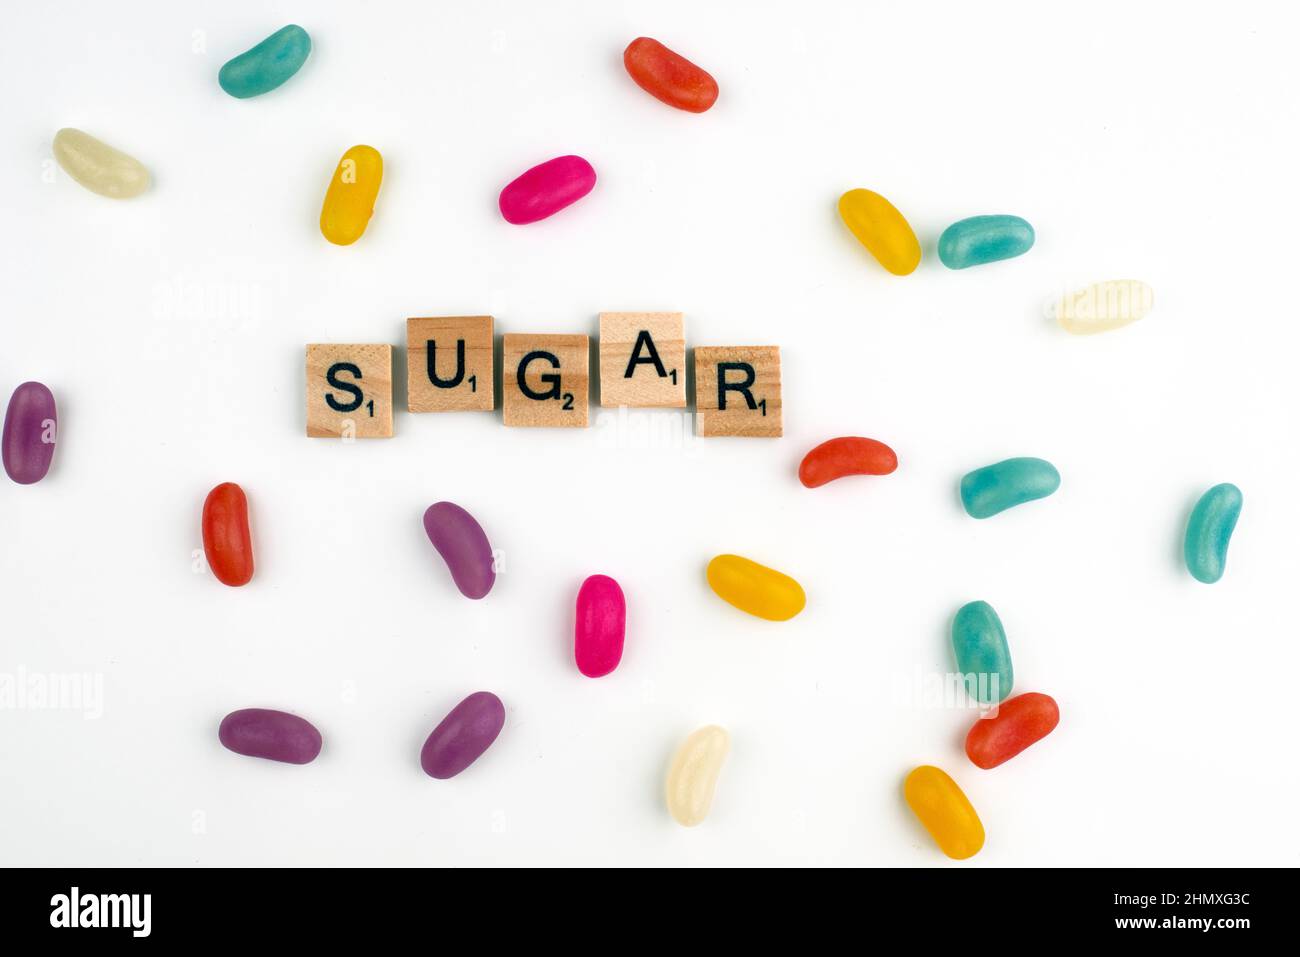 London, UK - February 12th 2022: Sugar scrabble tiles sign surrounded by candy Stock Photo